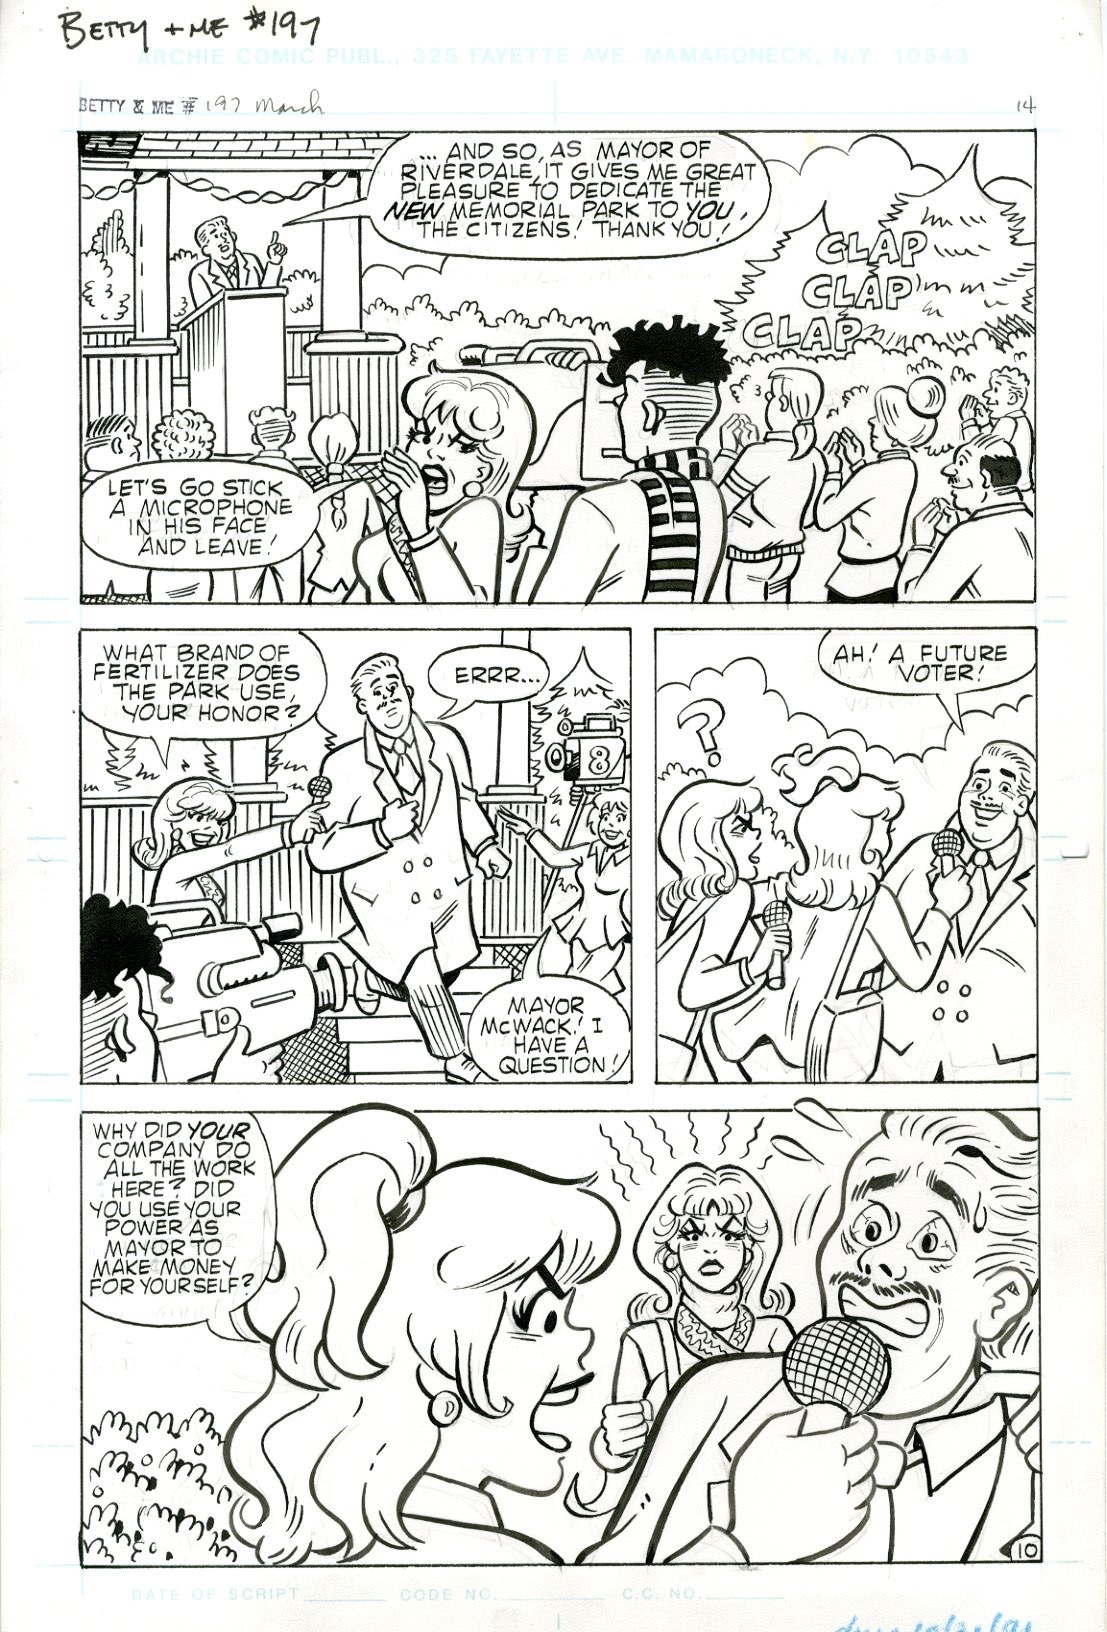 Betty &amp; Me  5 Page Story - 3641